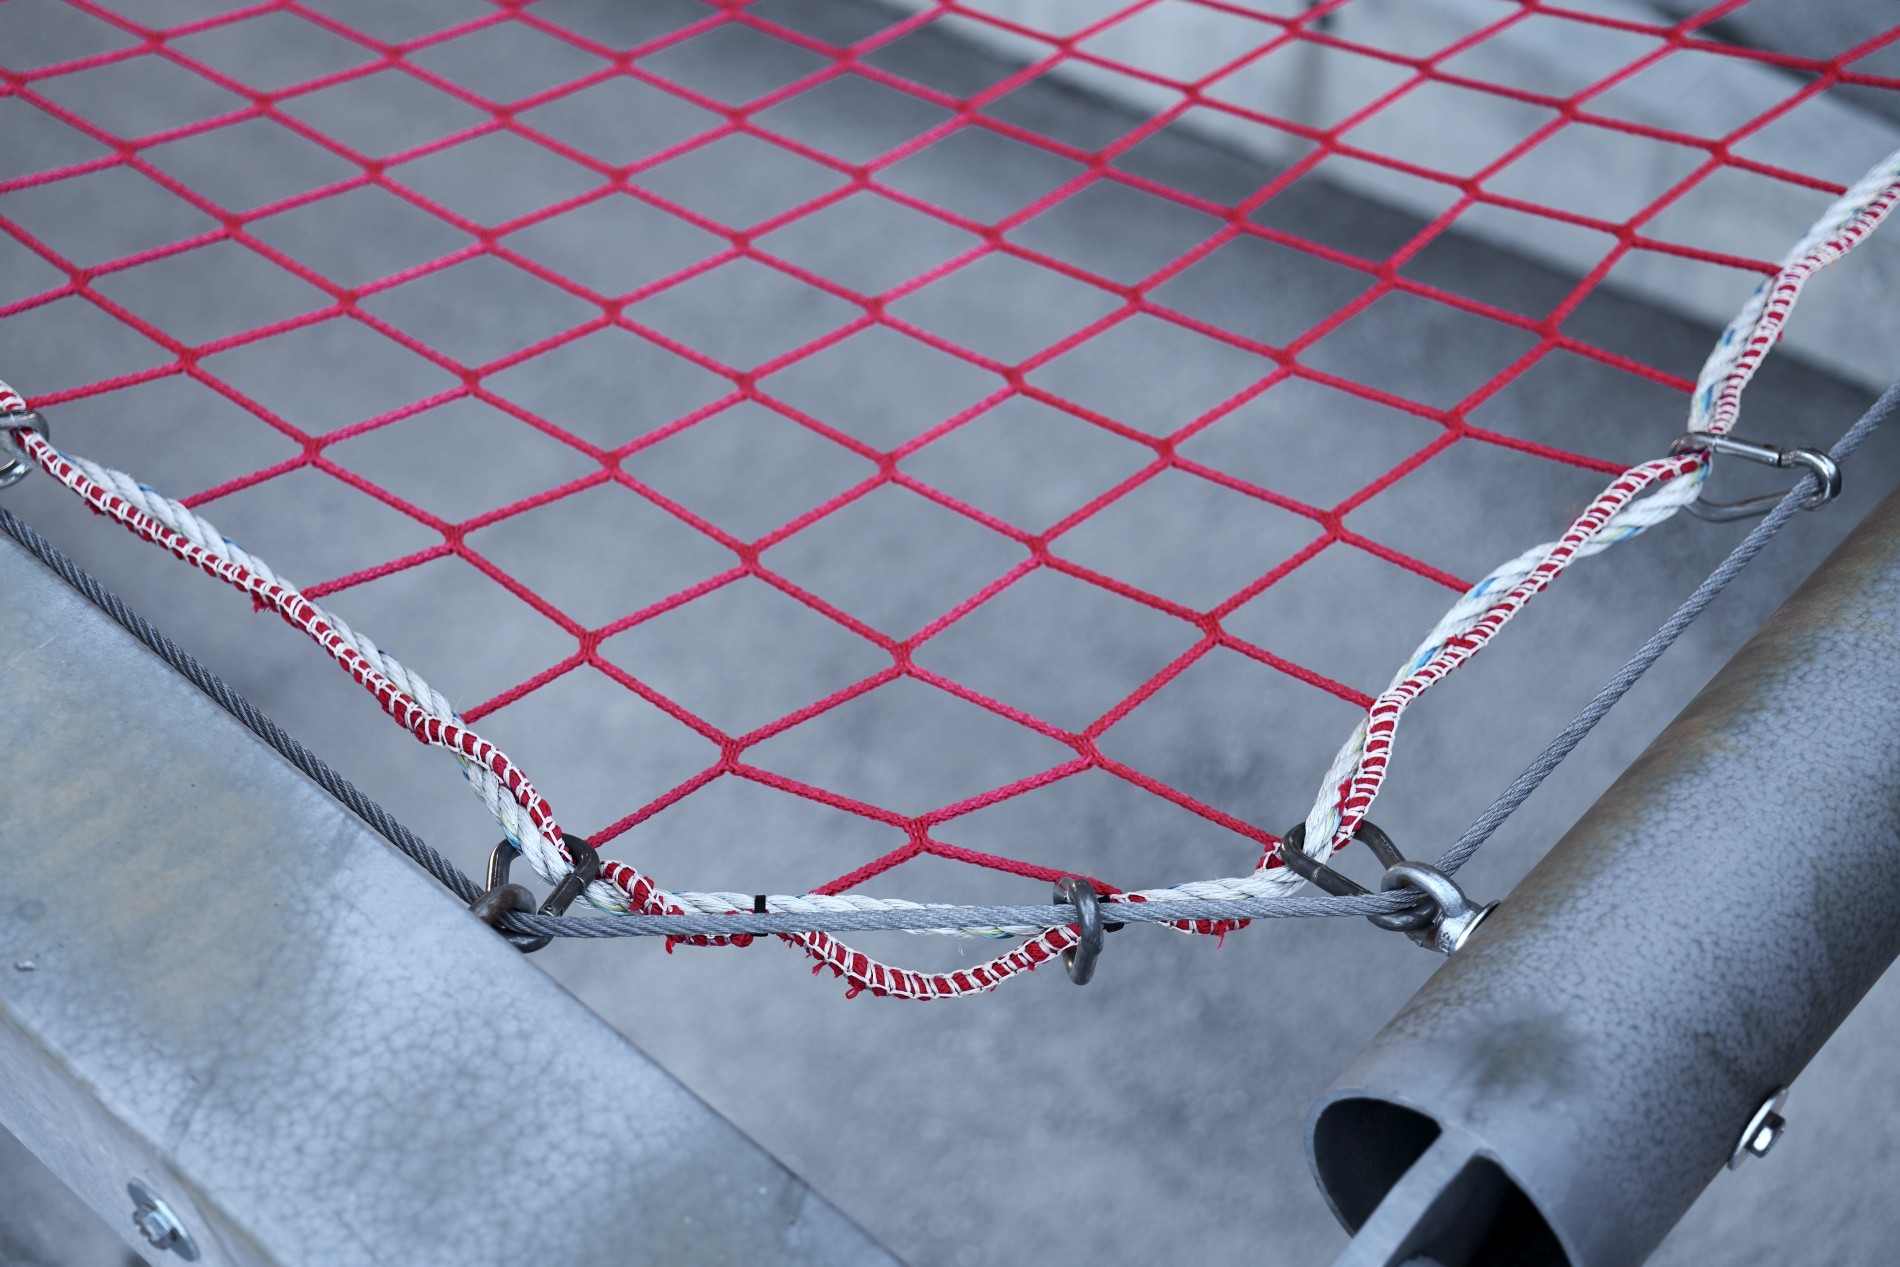 Detail of the safety net and fall prevention net